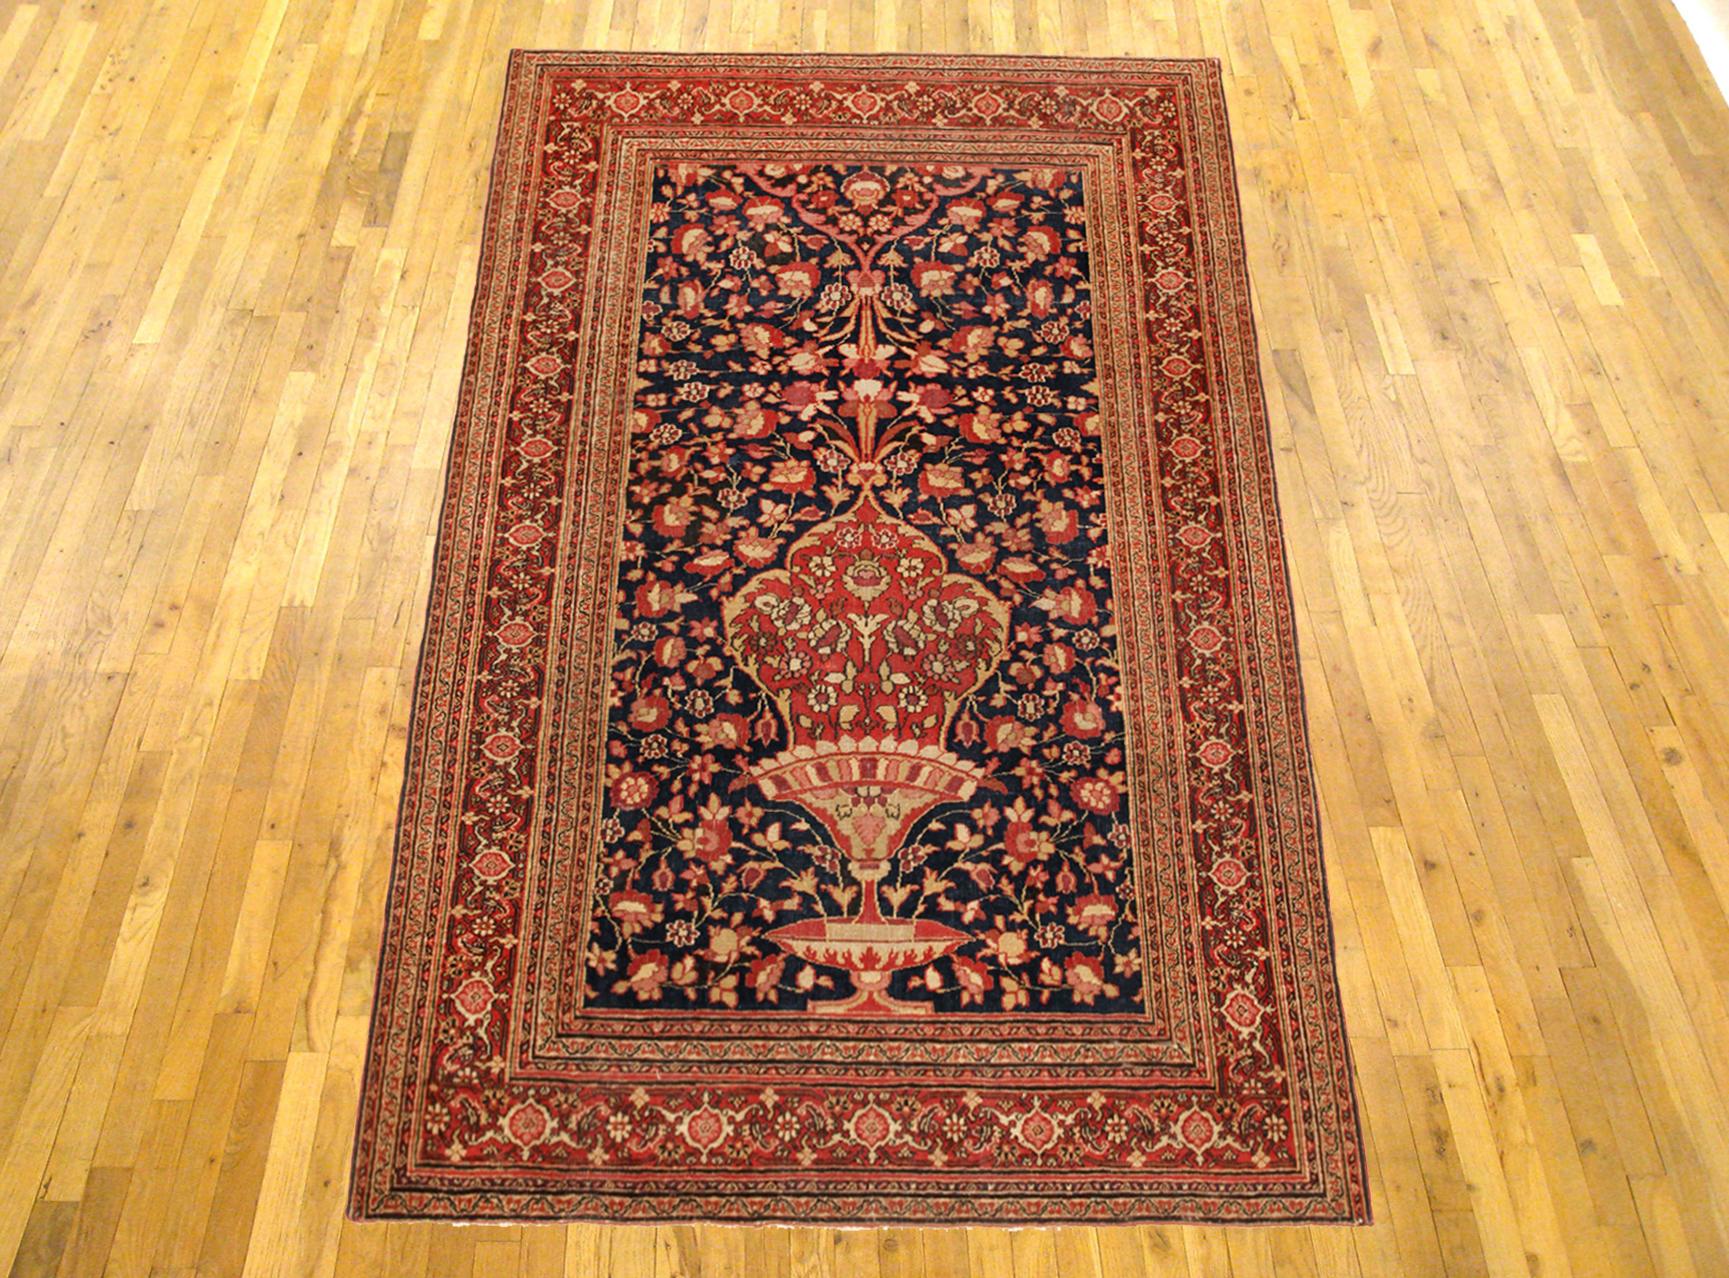 Antique Persian Khorason rug in Small Size, circa 1910

An antique Persian Khorason oriental rug, circa 1910. Size 5'9